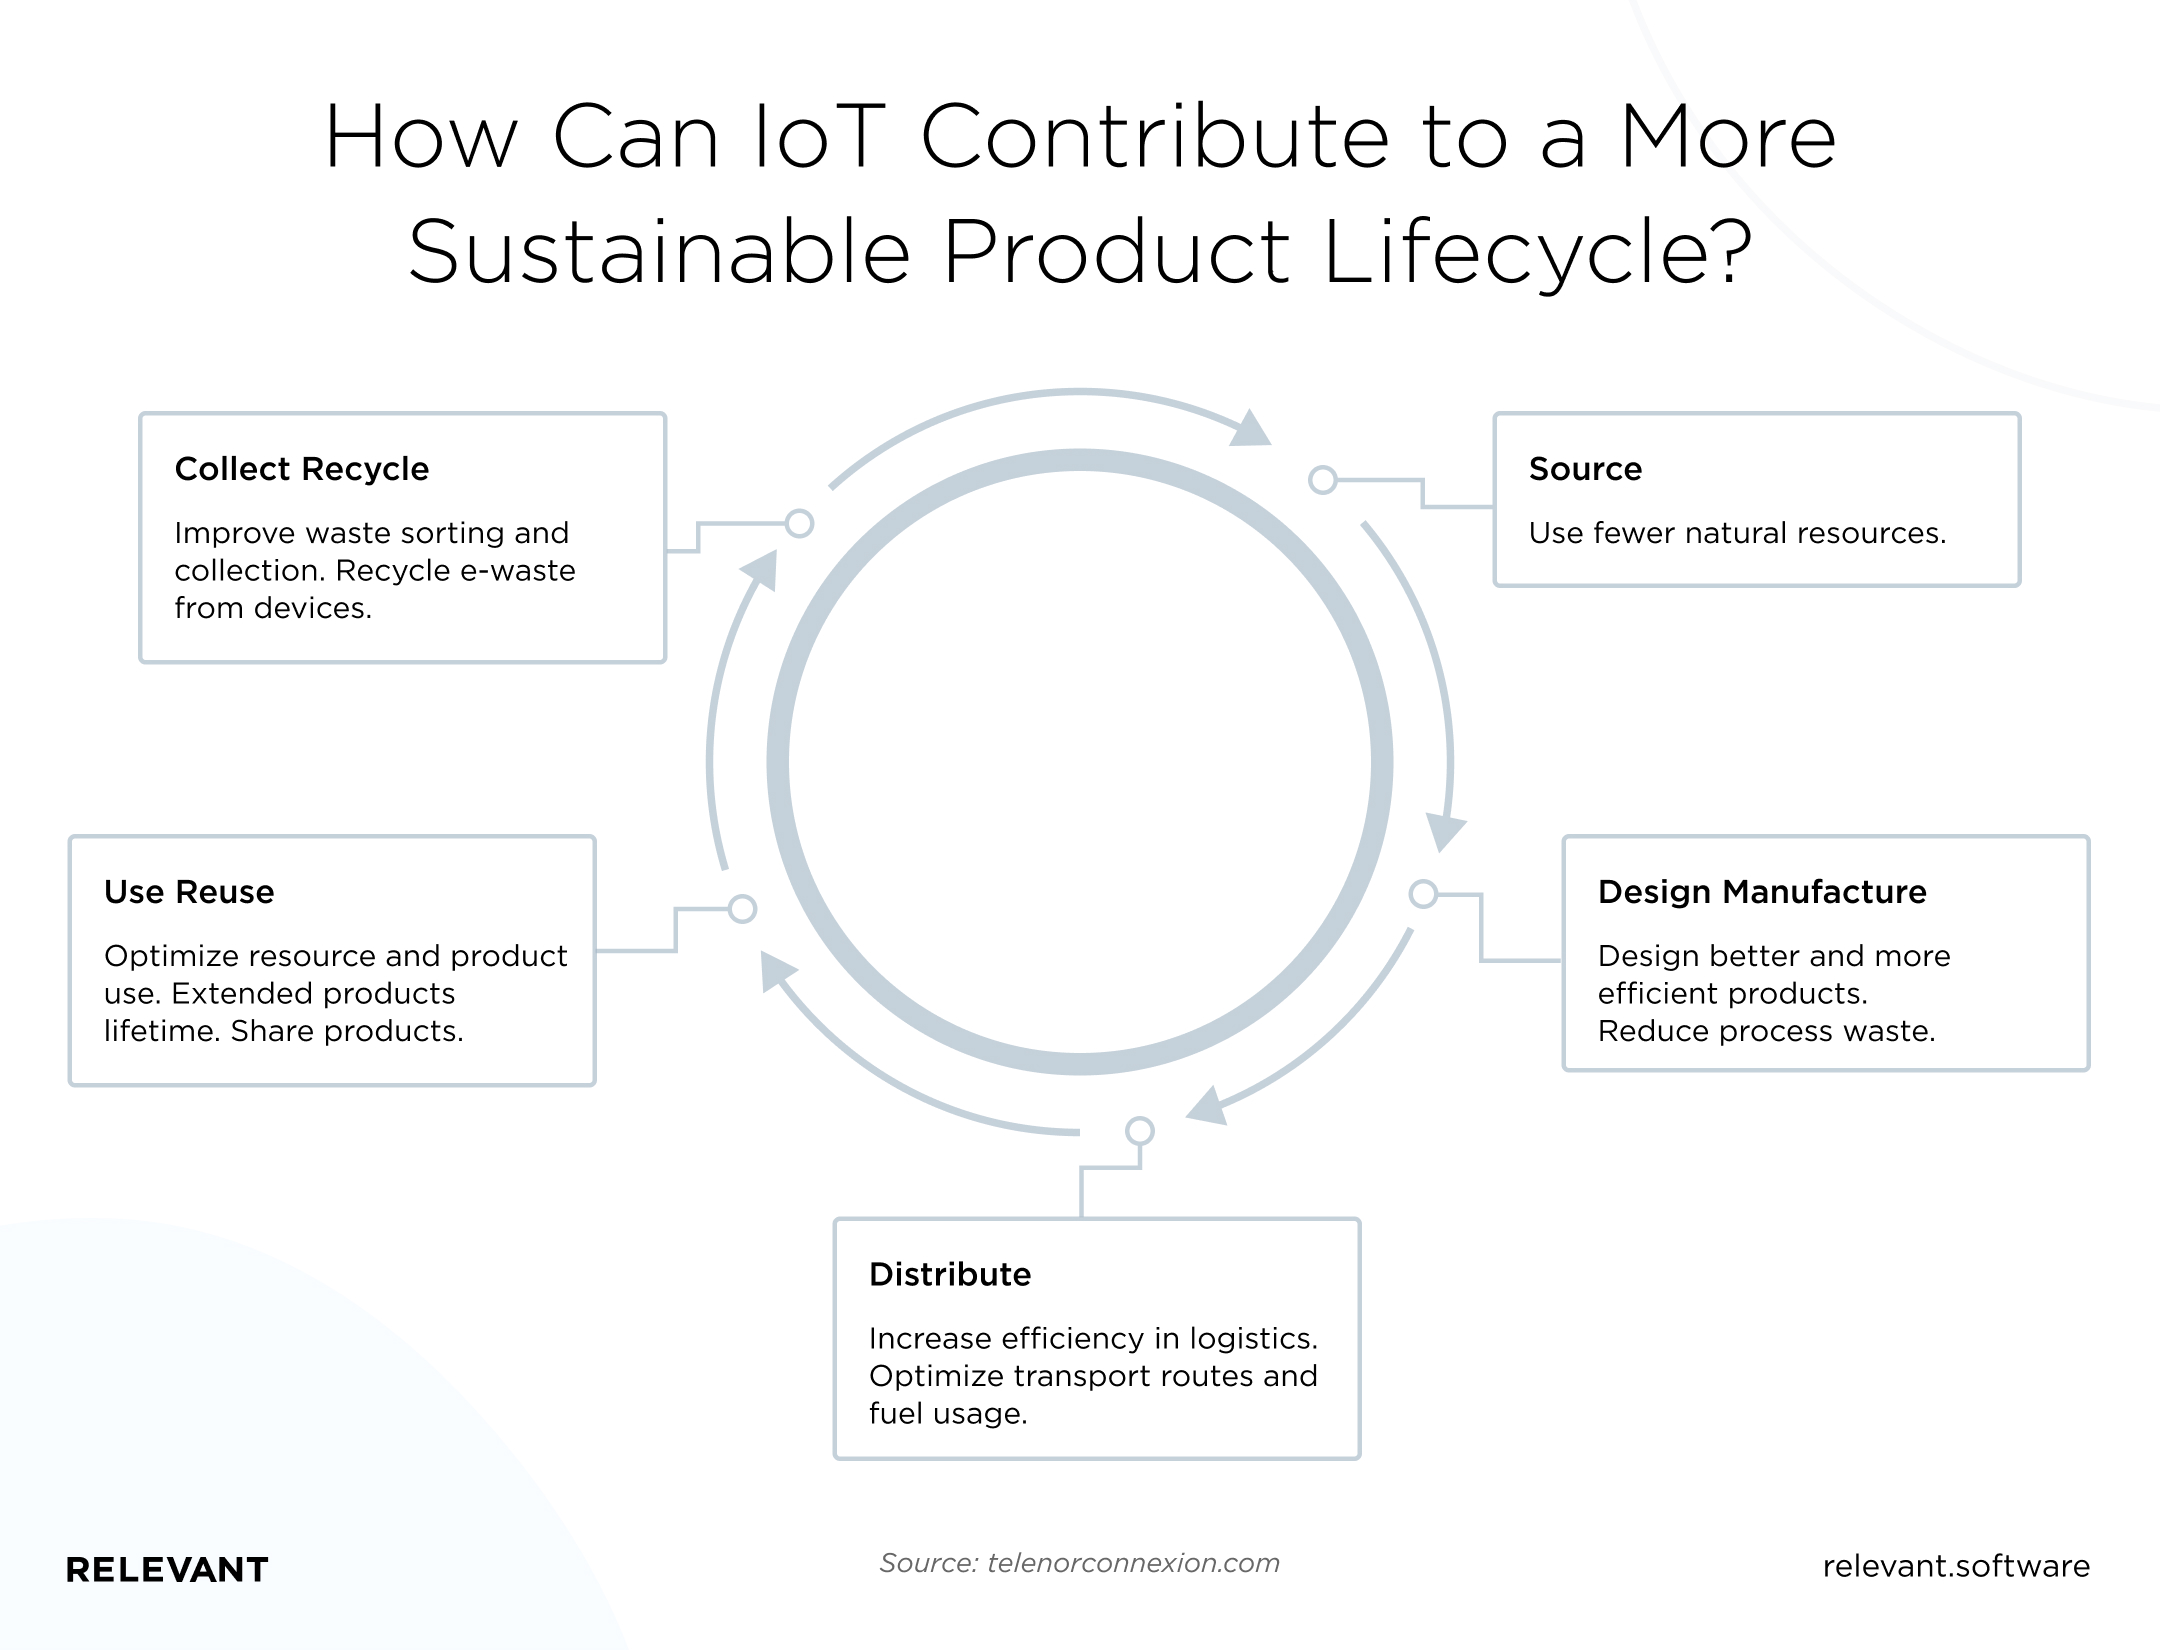 How Can IoT Contribute to a More Sustainable Product Lifecycle?